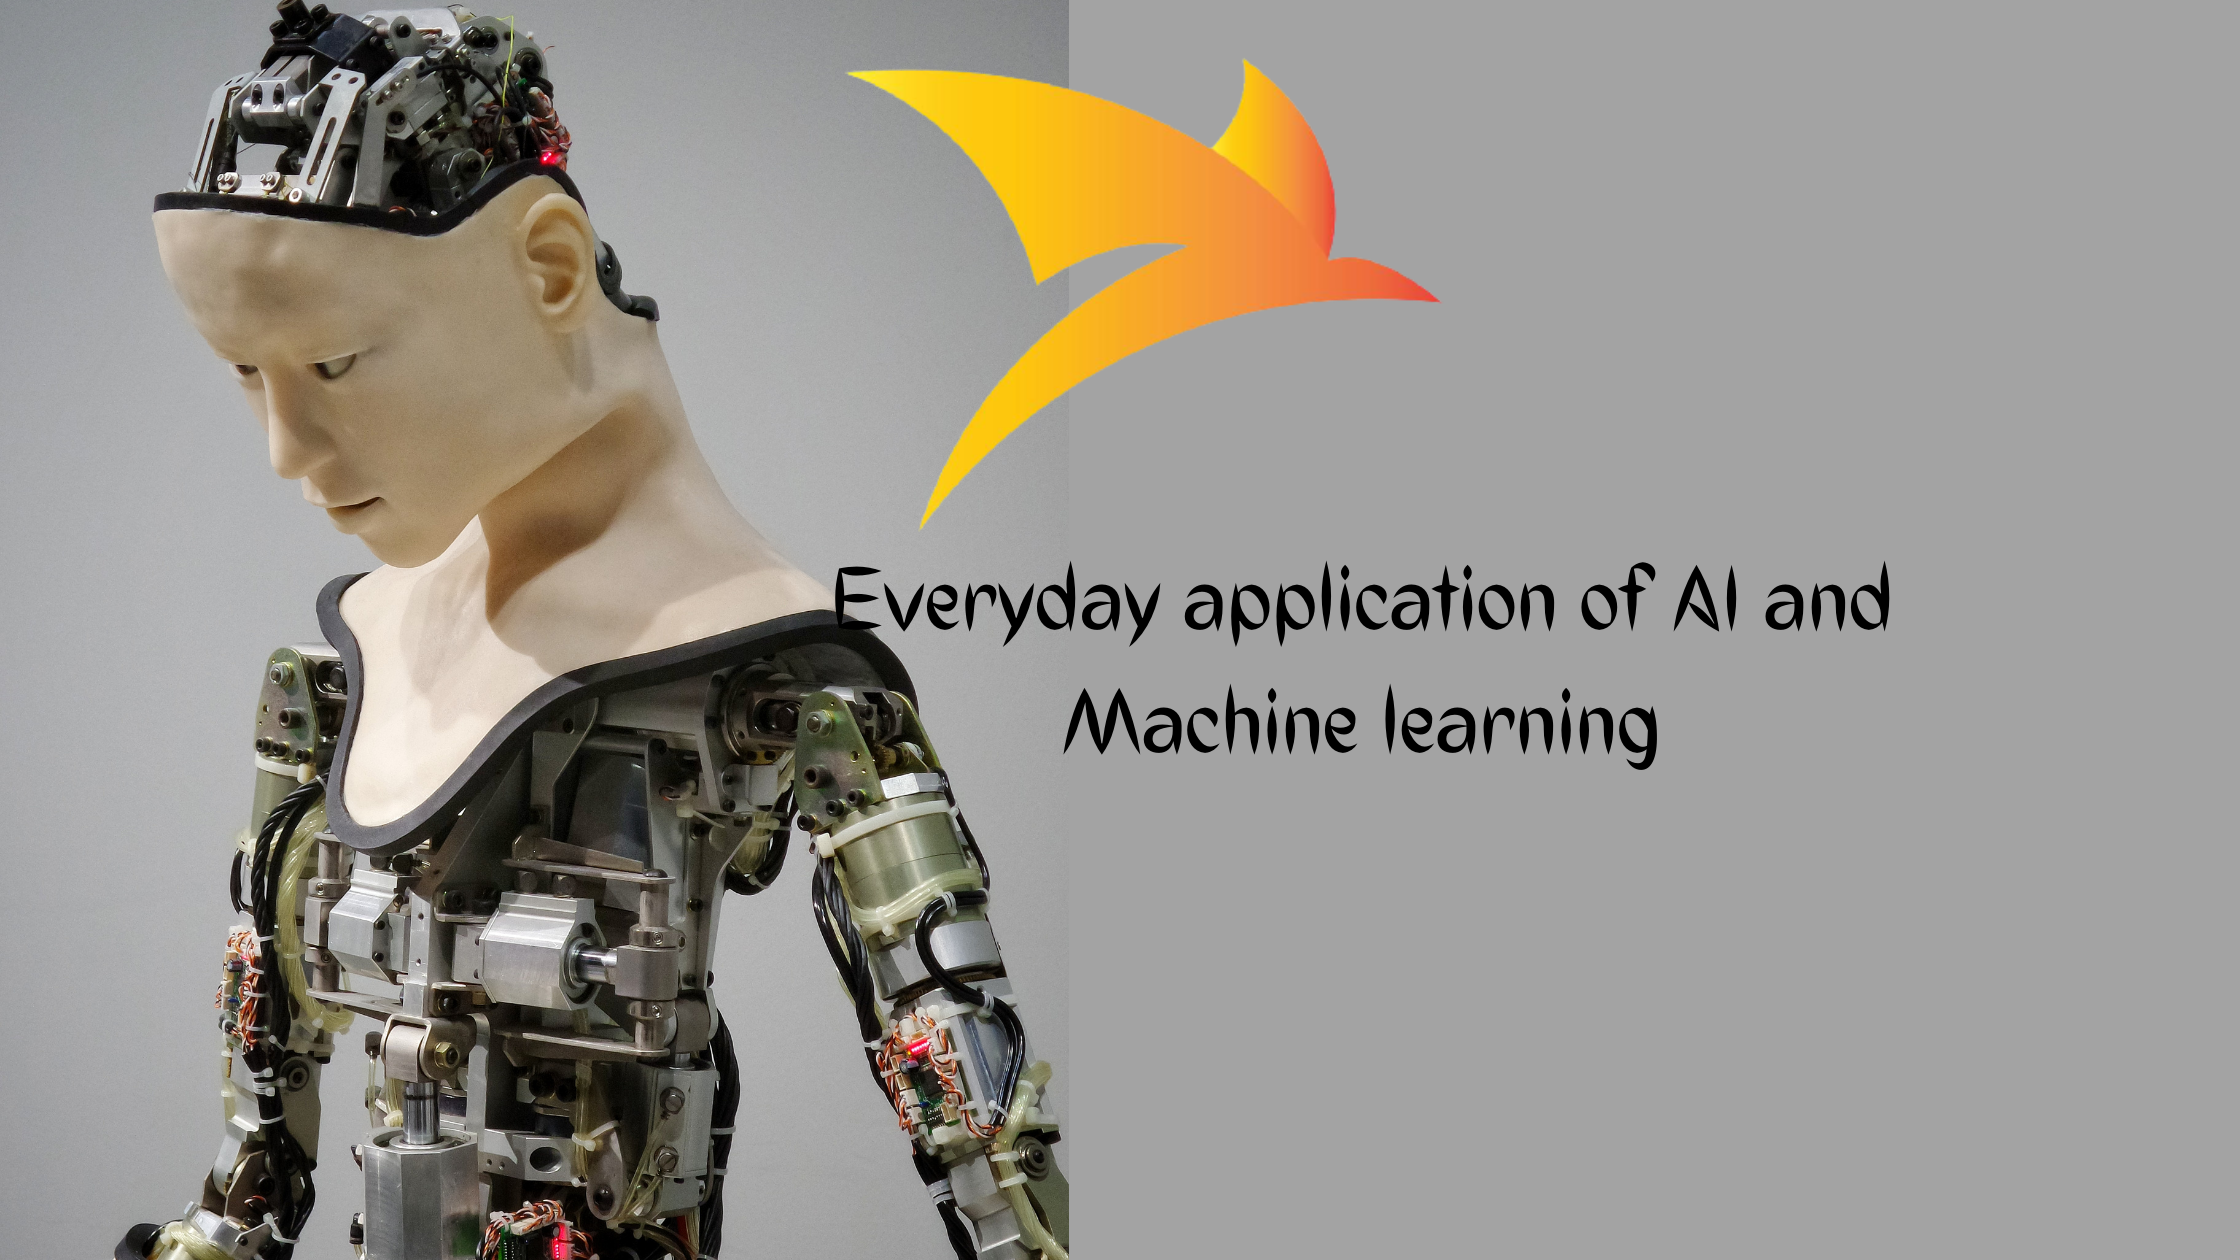 The Everyday Applications of Artificial Intelligence in some Aspect of today’s world.